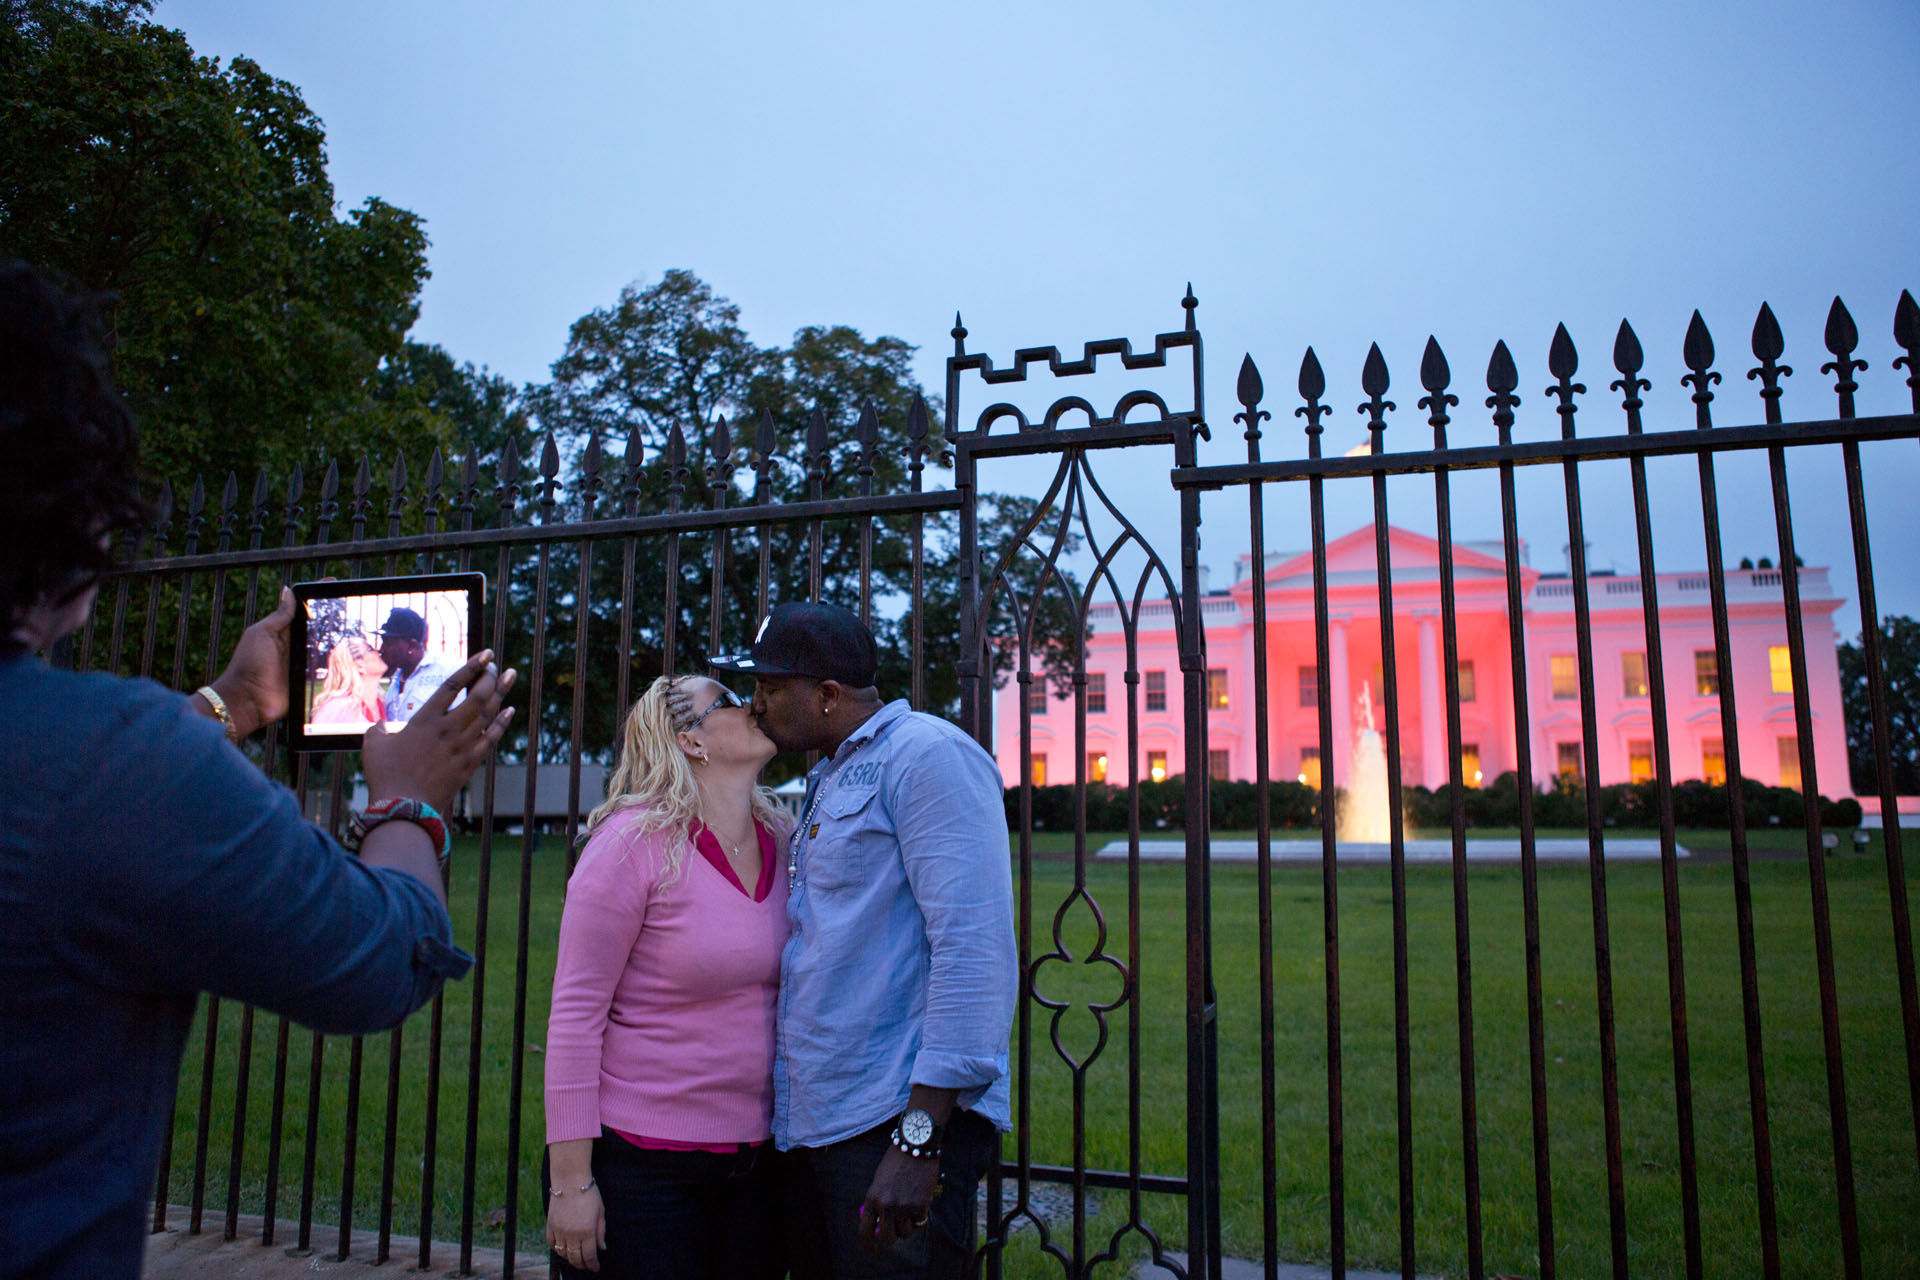 The White House Is Illuminated Pink